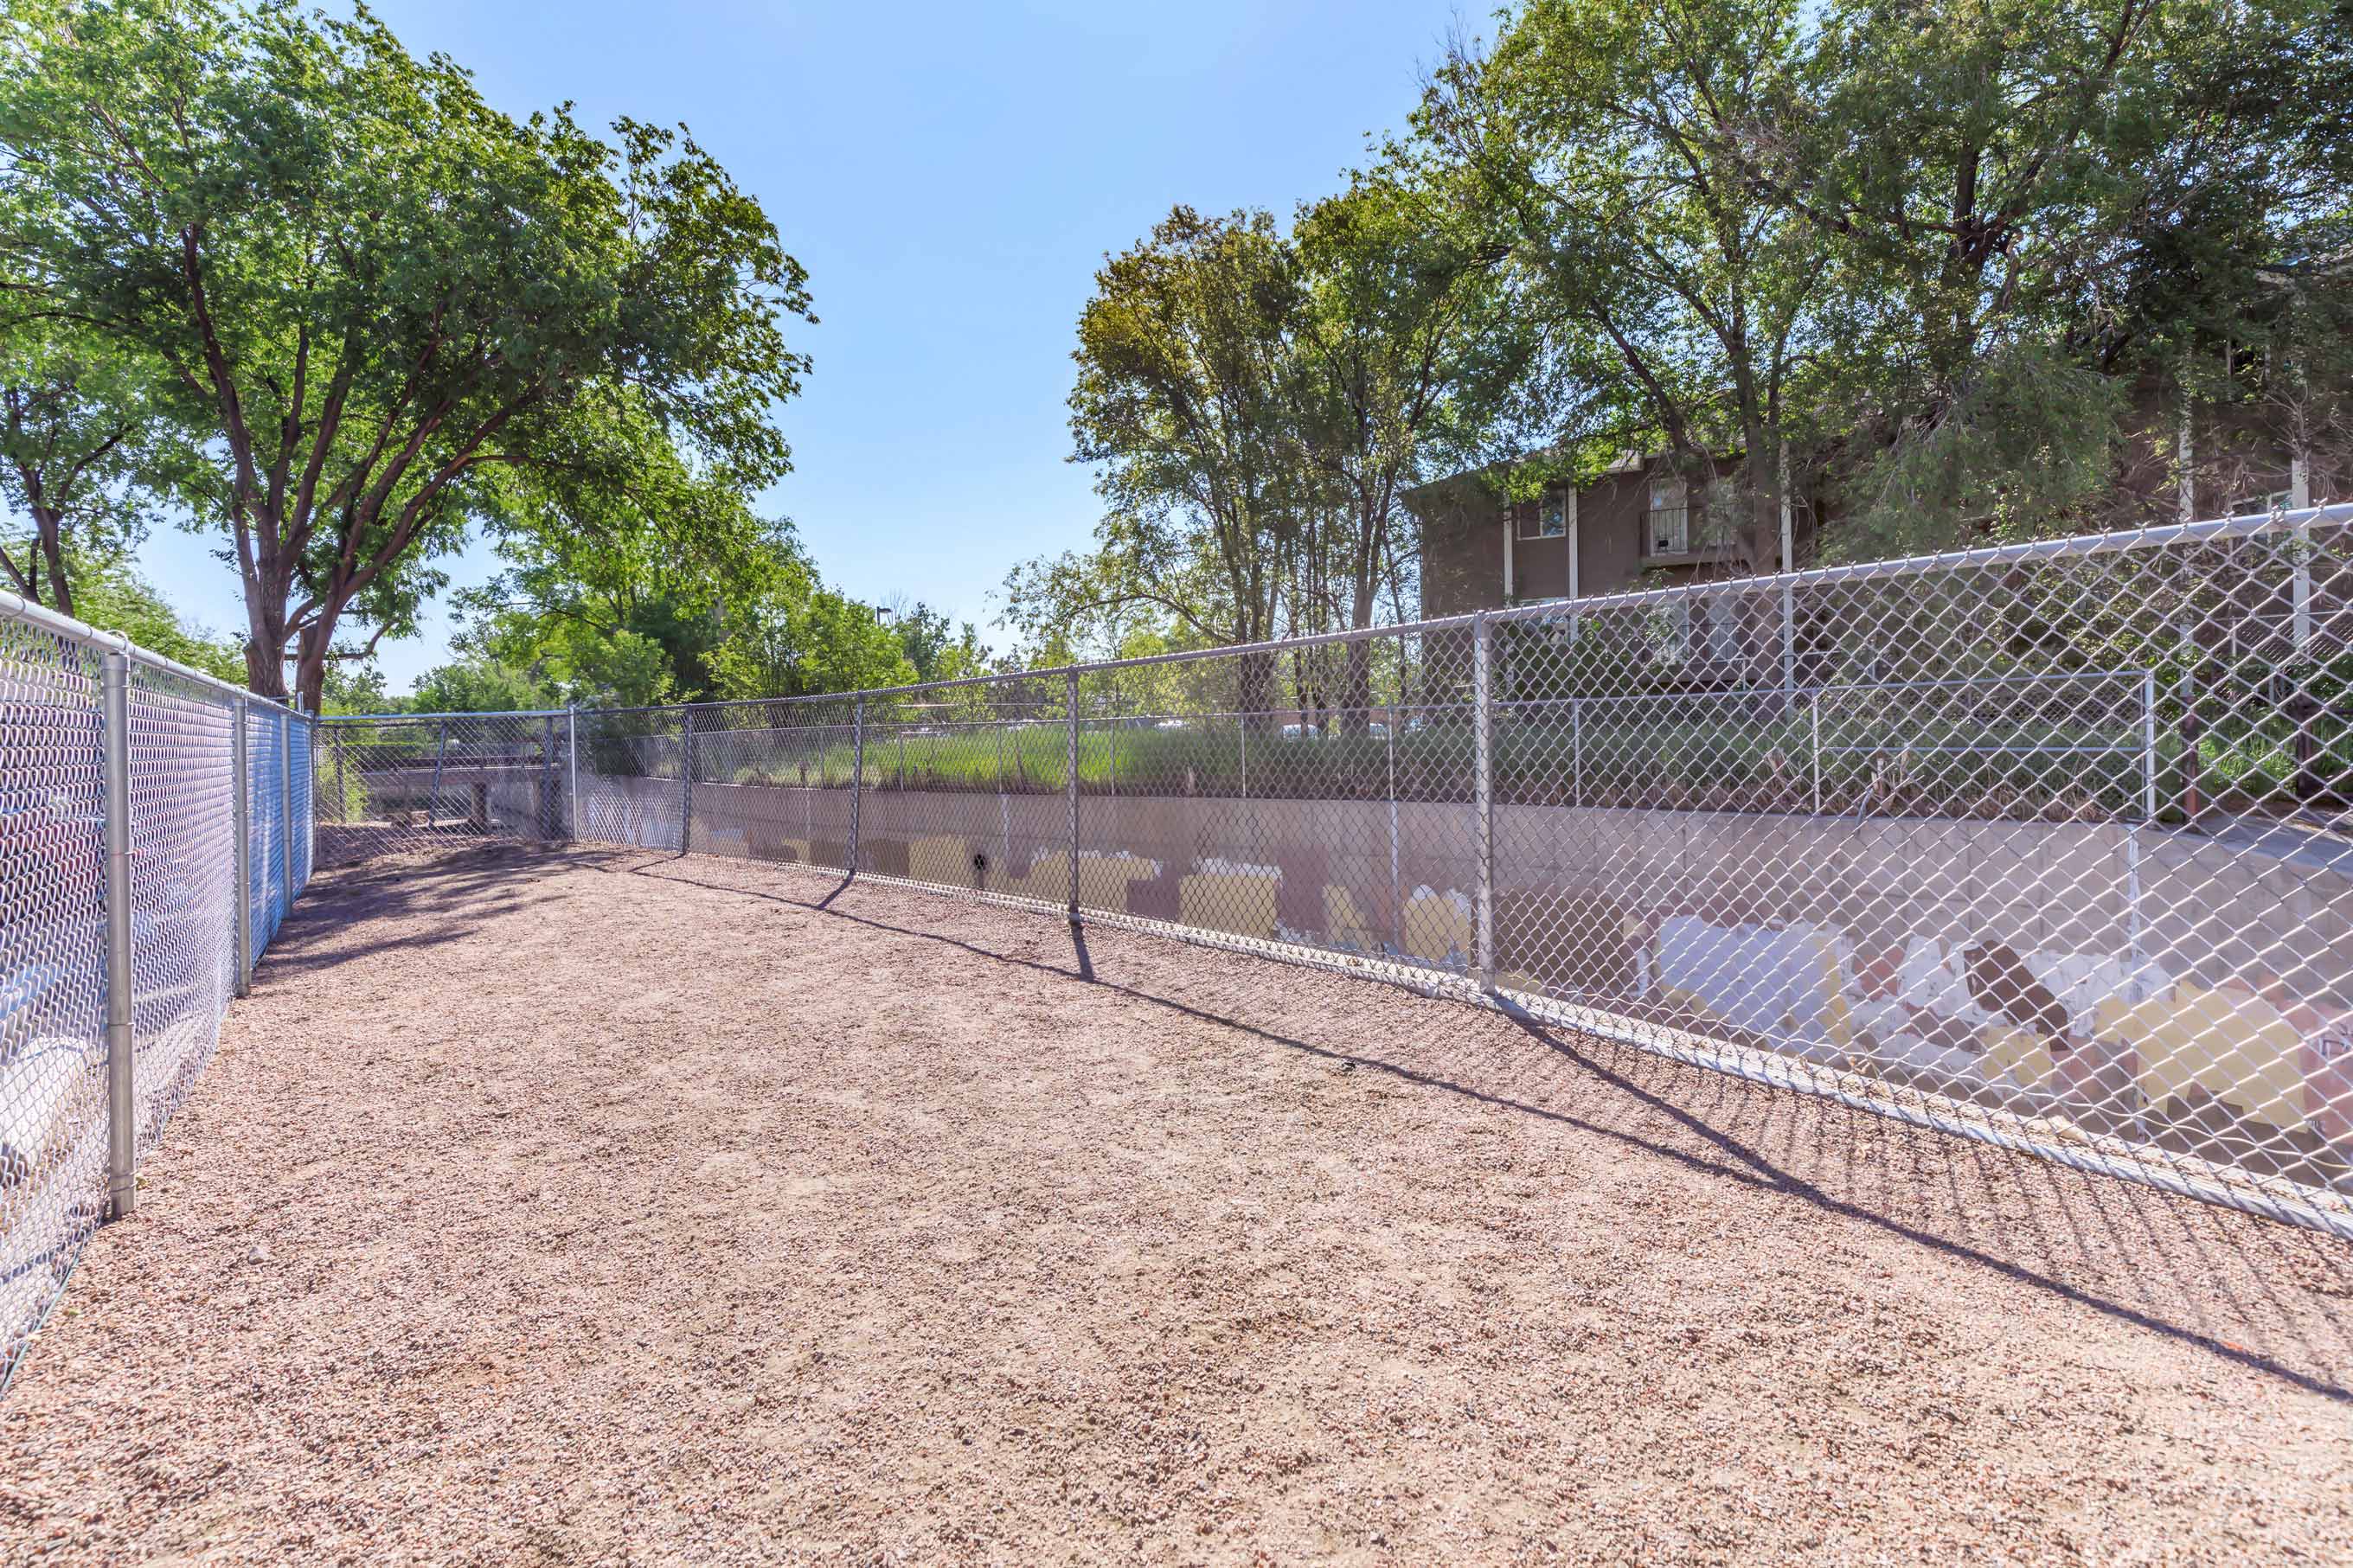 dog park at the Aero Place Apartments, located in Colorado Springs, CO.